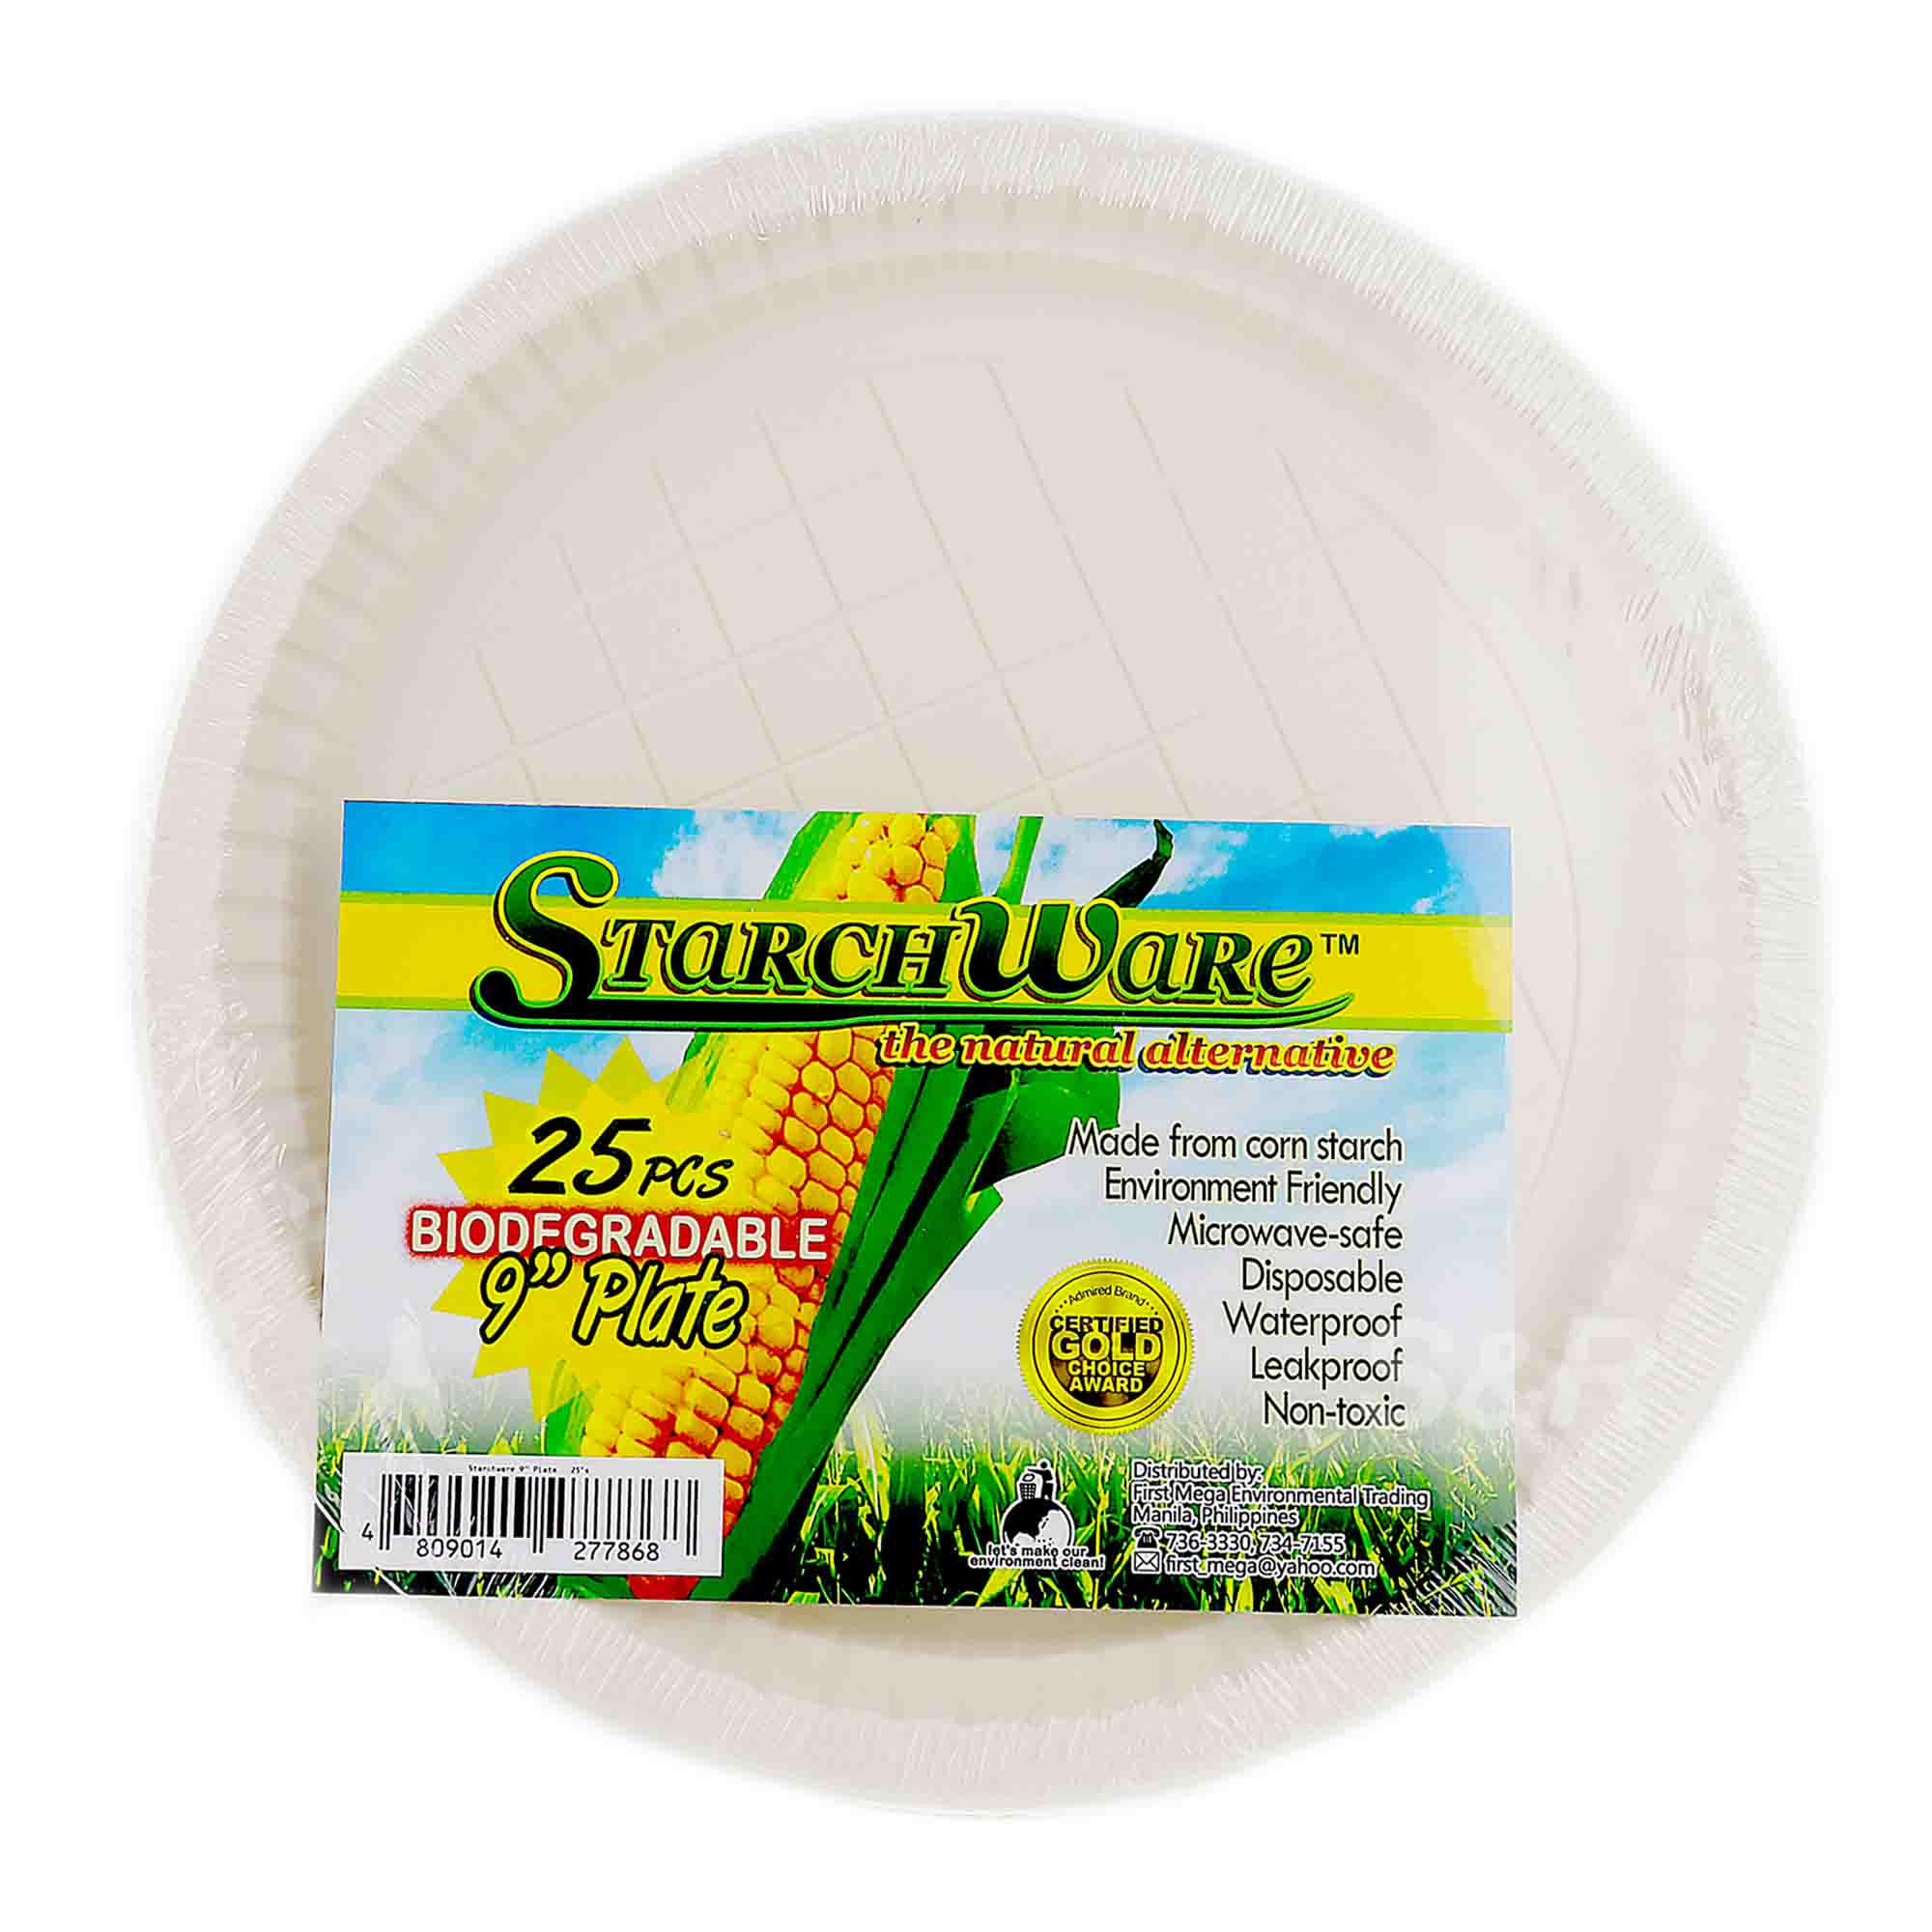 Starchware 9-inch Biodegradable Disposable Plate 25pcs